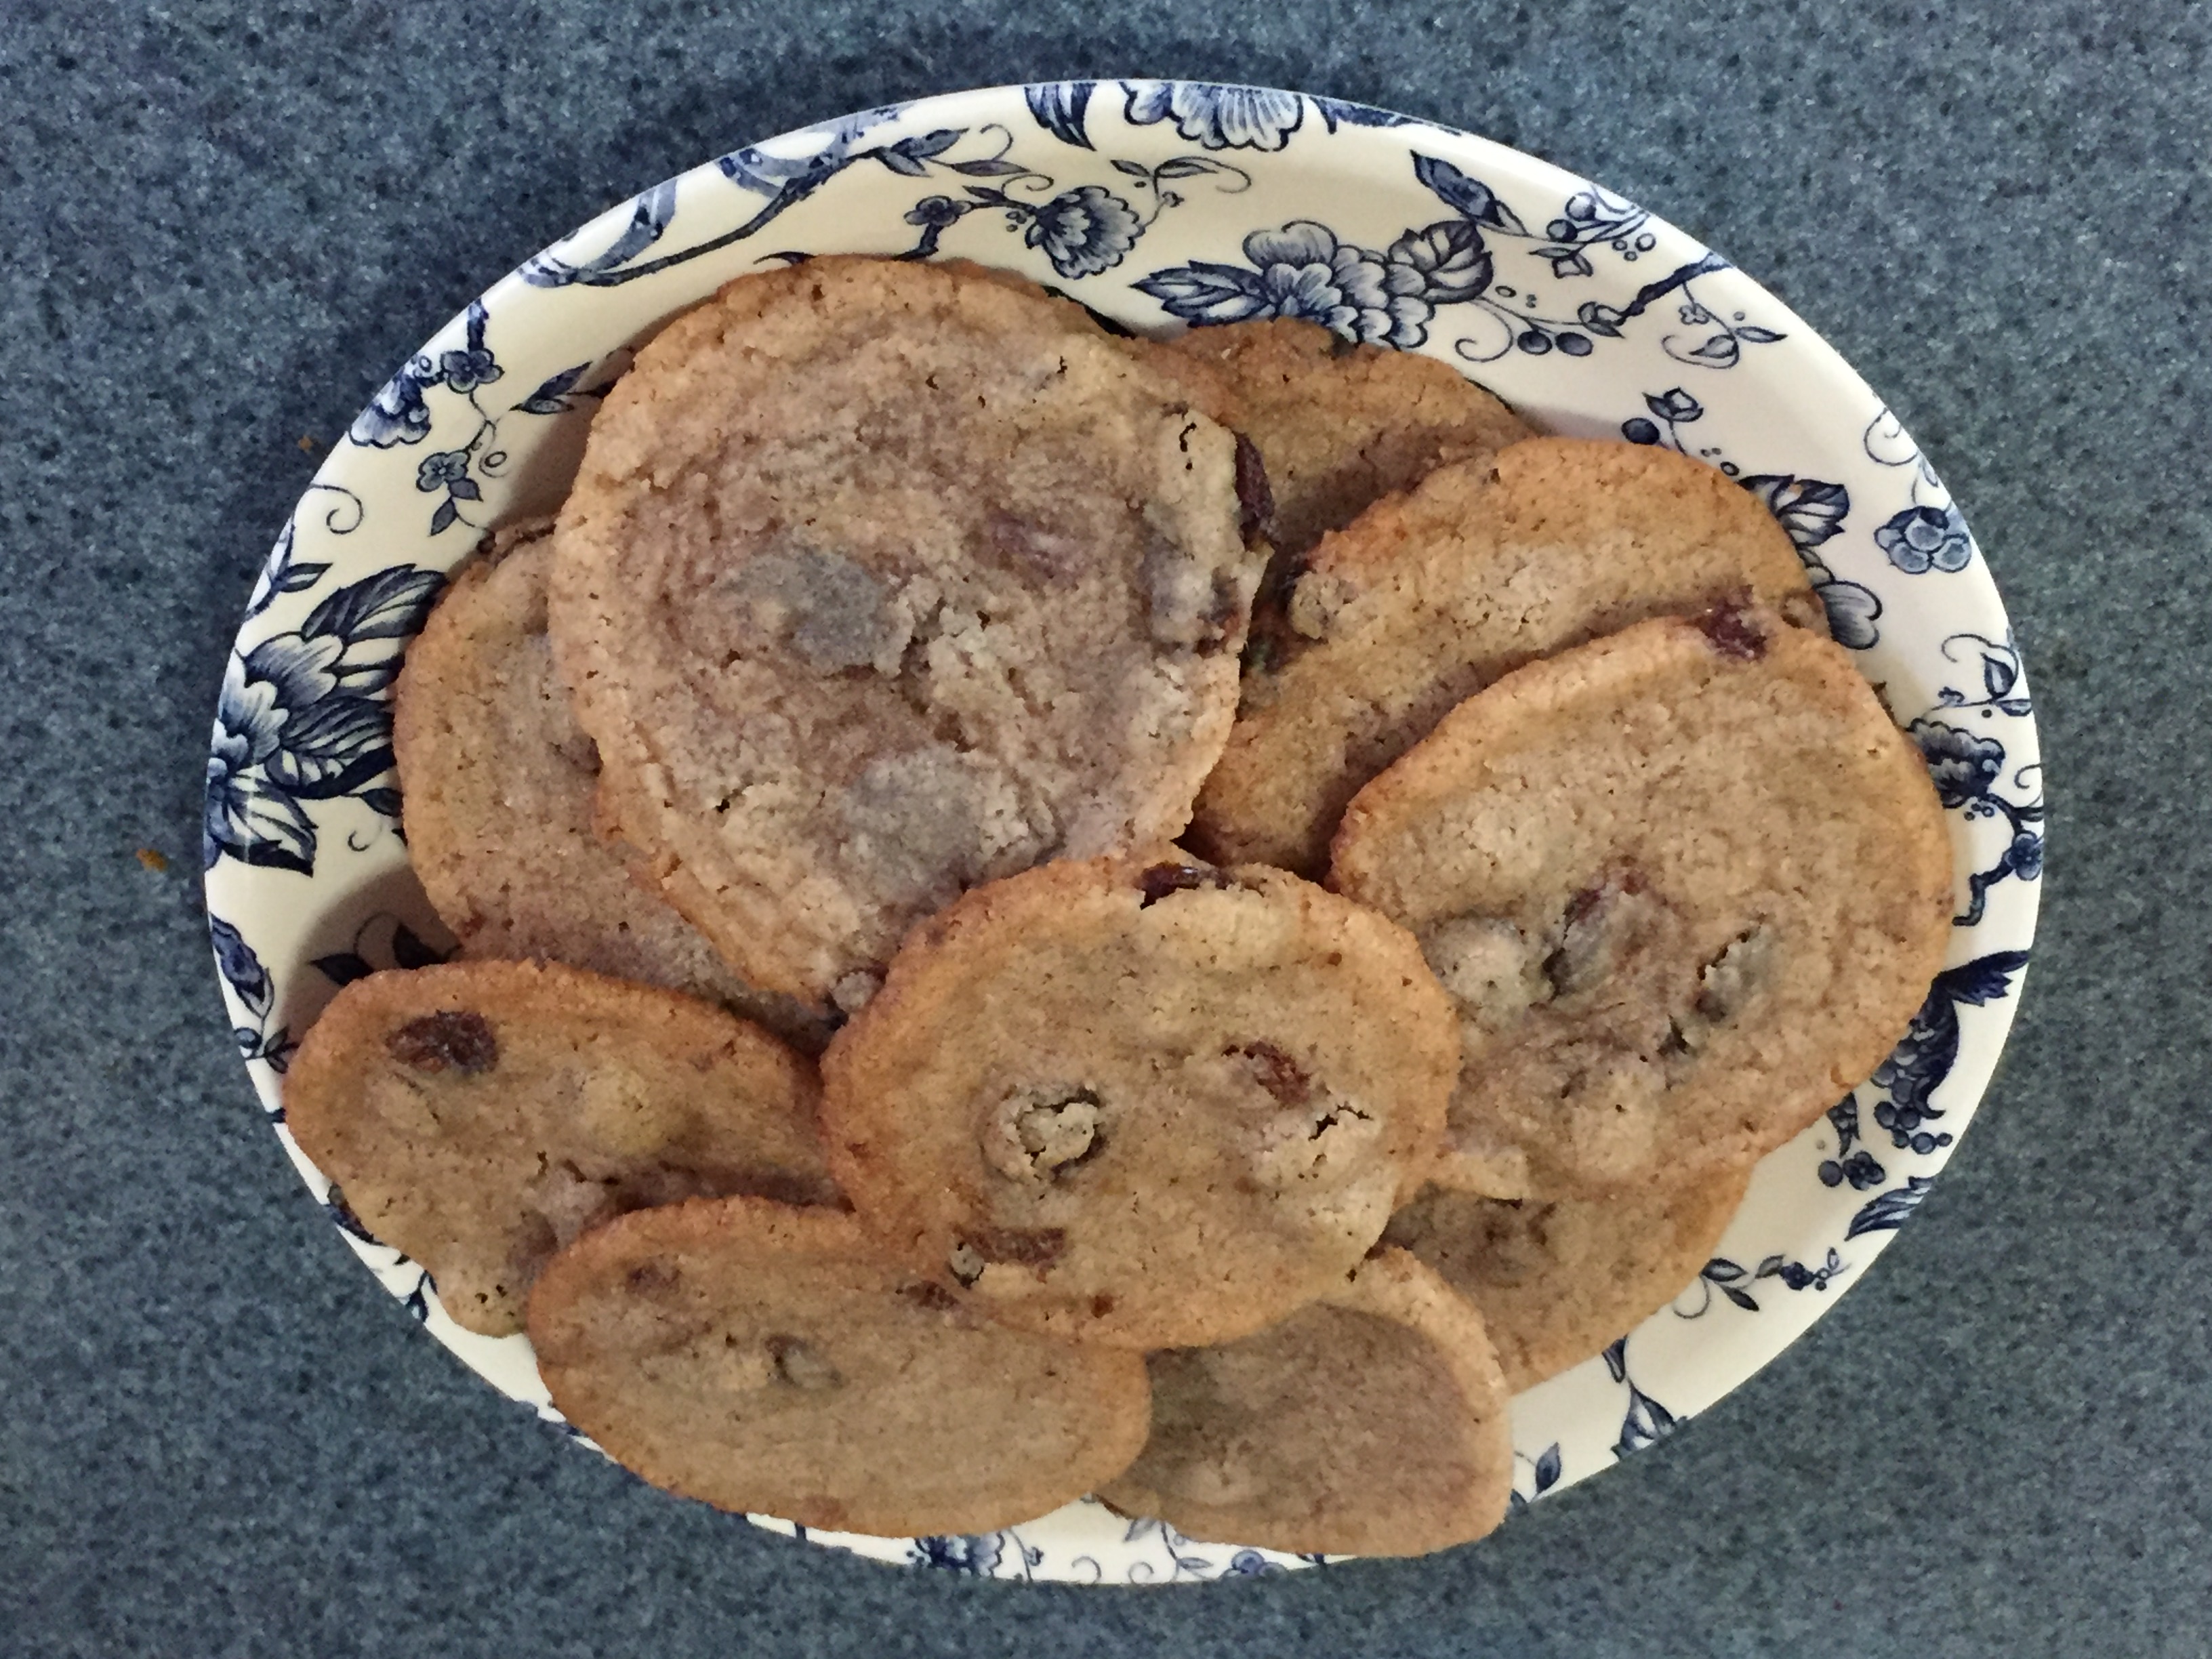 A stack of freshly baked raisin cookies on a blue floral china plate.